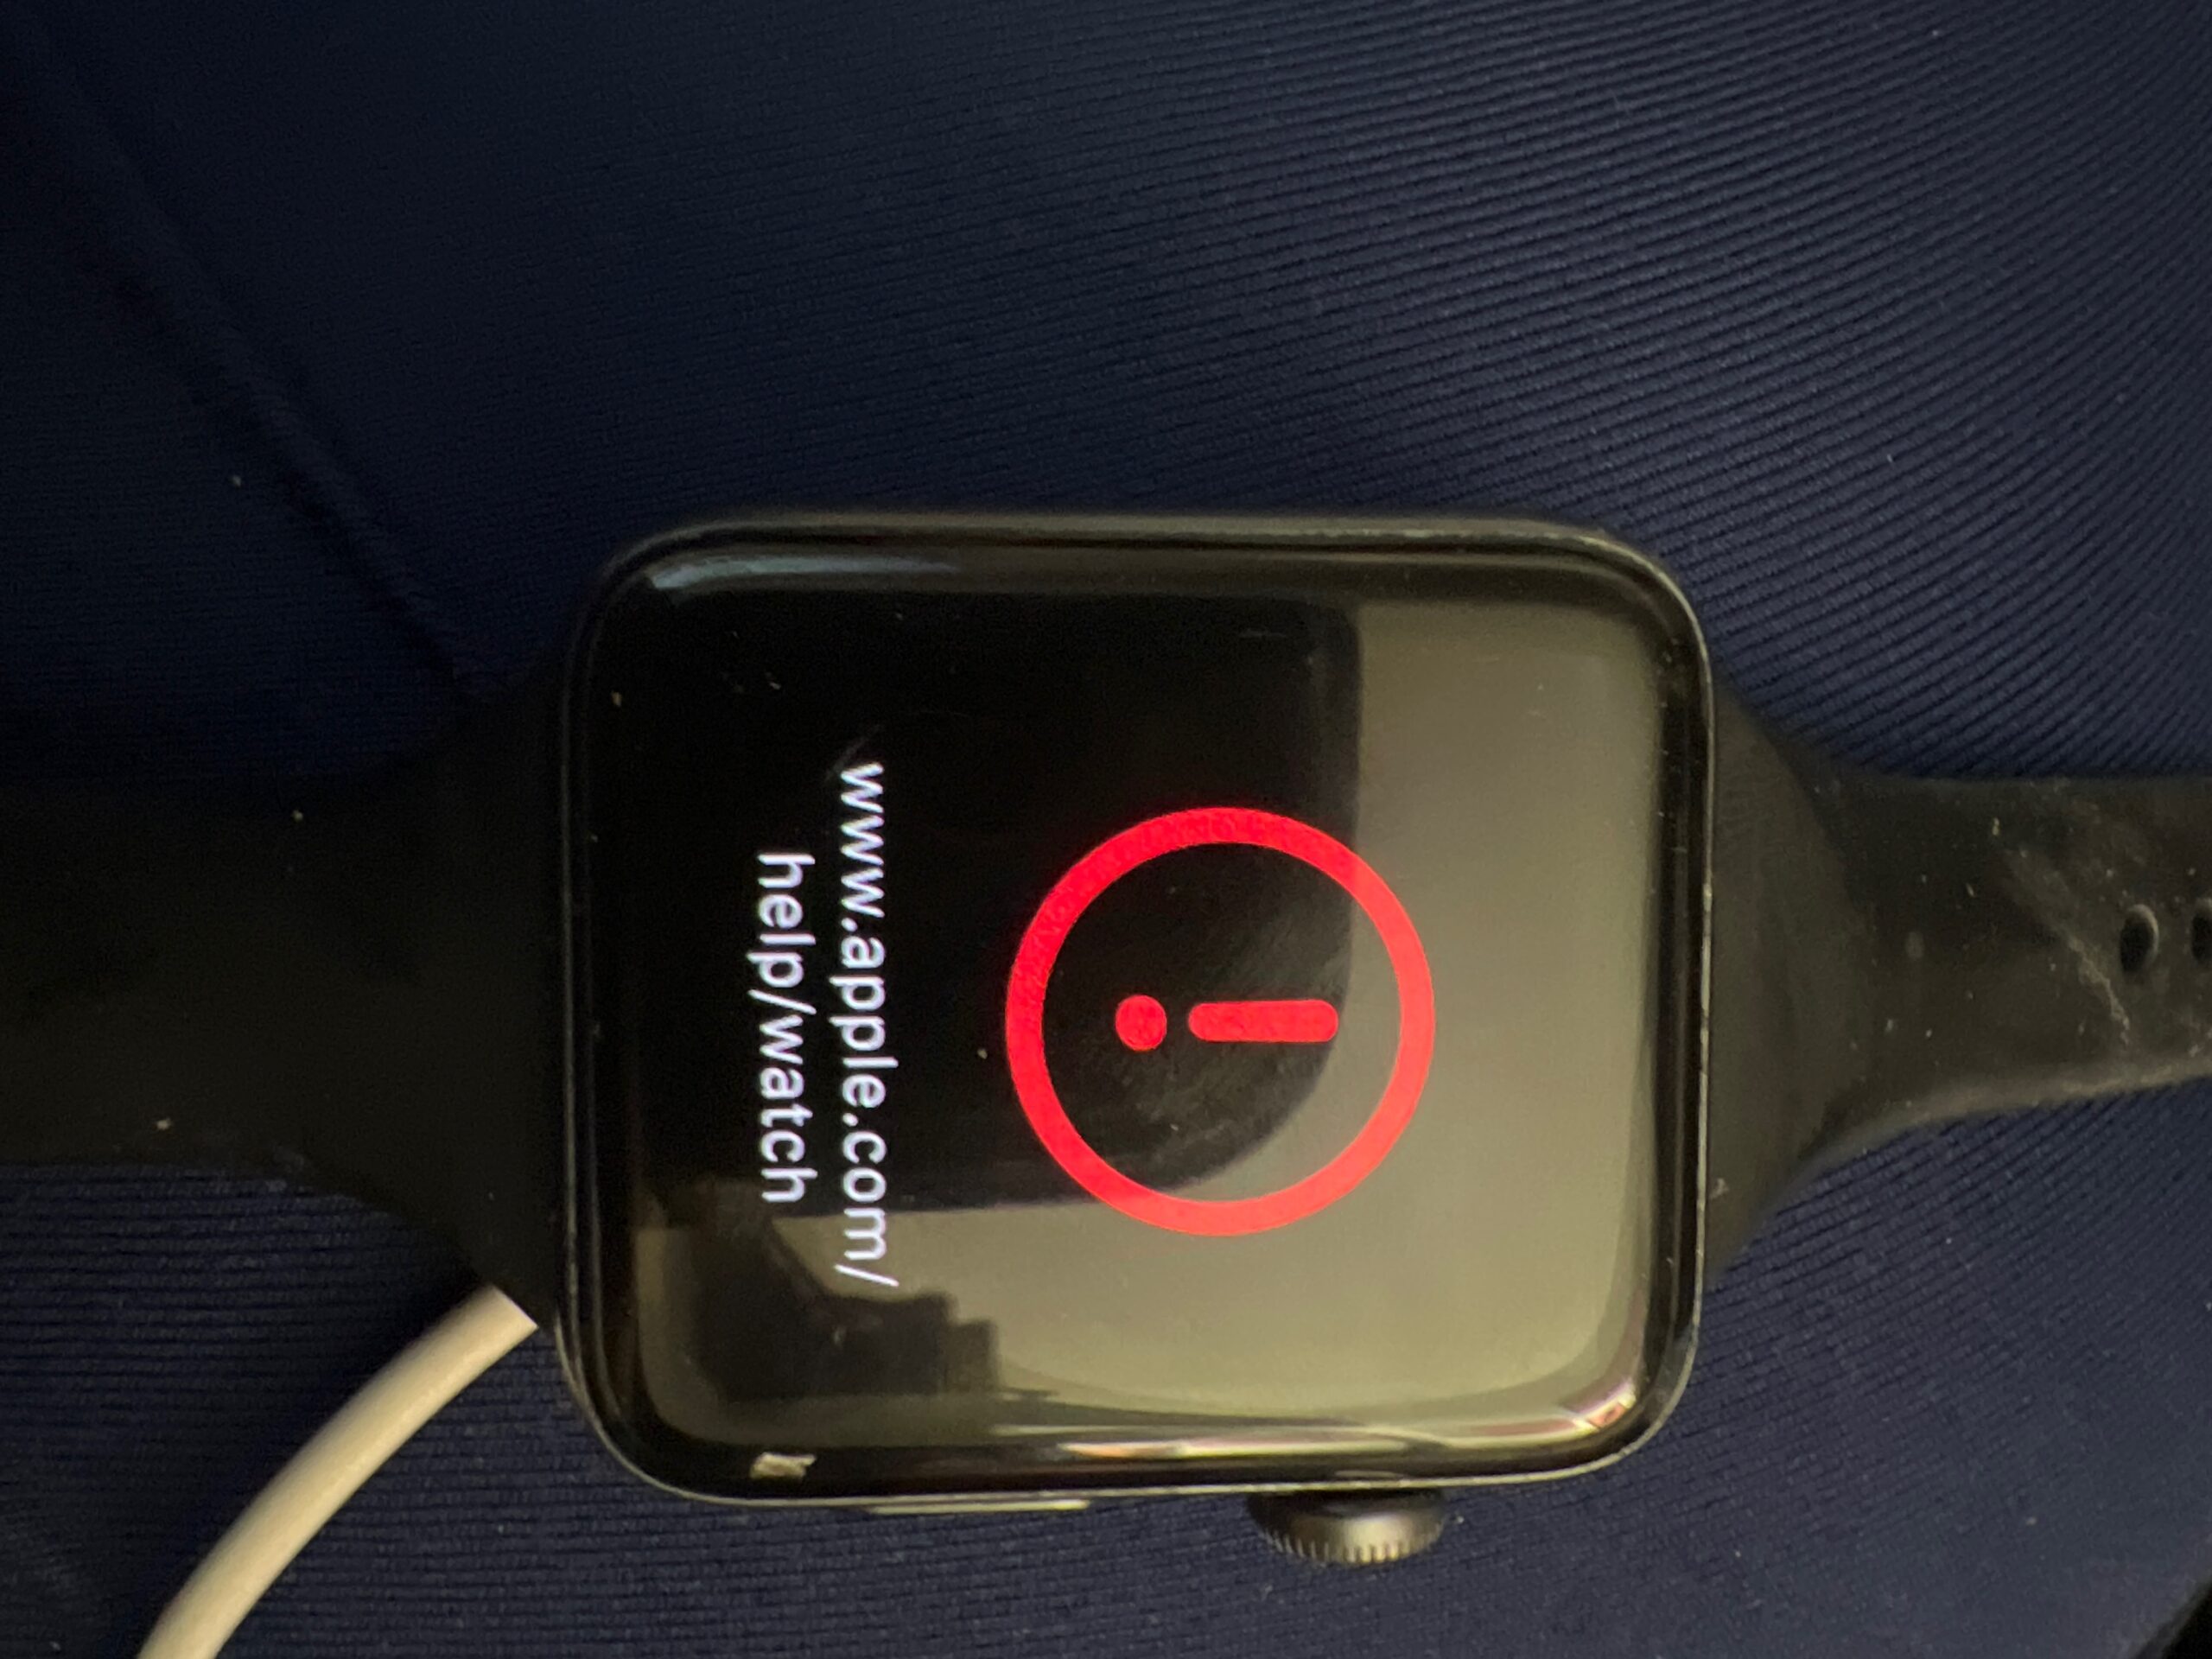 Resetting Your Apple Watch: A Step-by-Step Guide